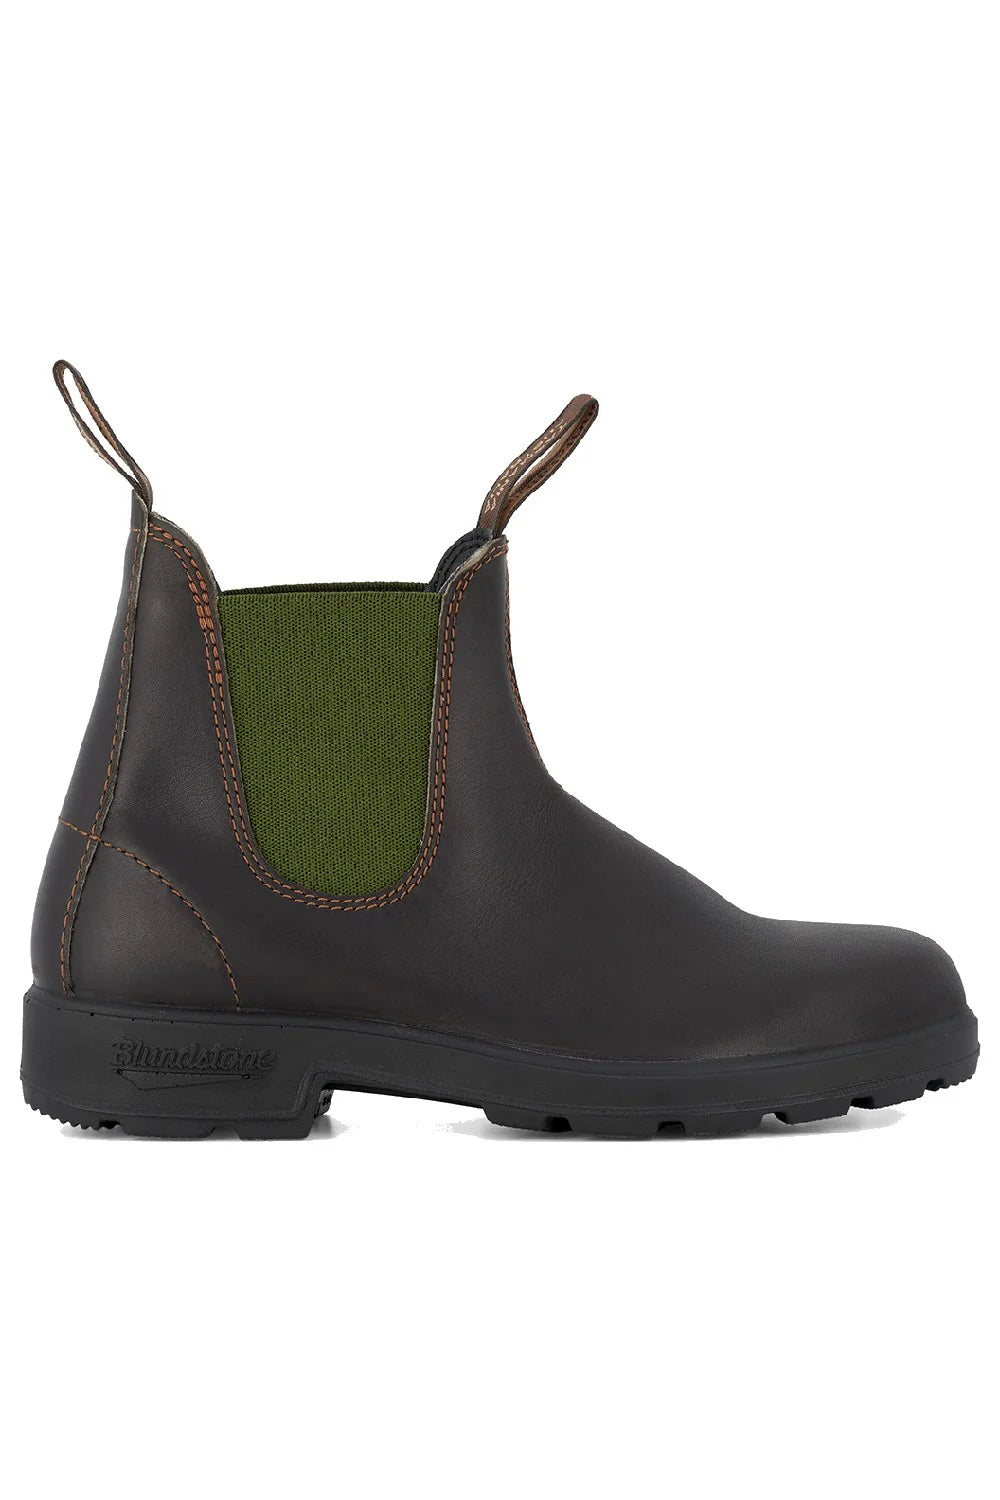 Blundstone Unisex 519 Leather Chelsea Boots Brown Olive